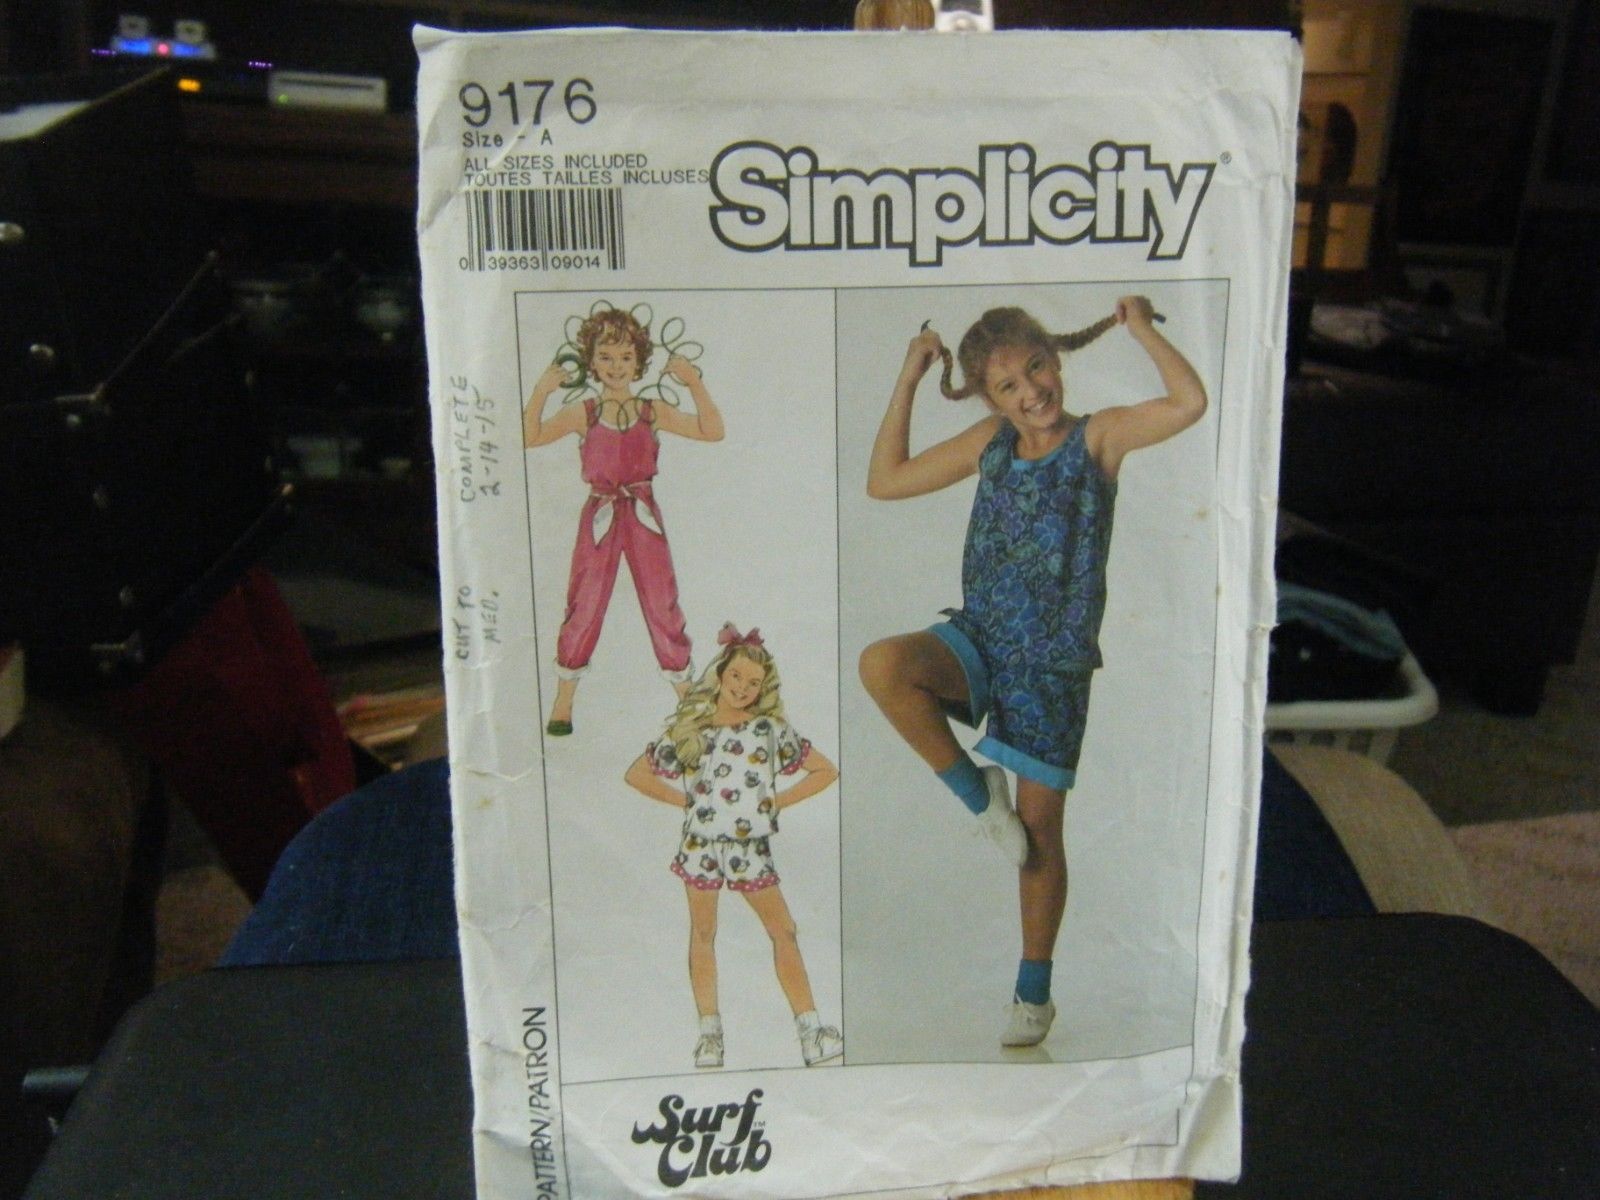 Primary image for Simplicity 9176 Girl's Pants, Shorts, Top, Shirts & Sash Pattern - Size S-M 7-10